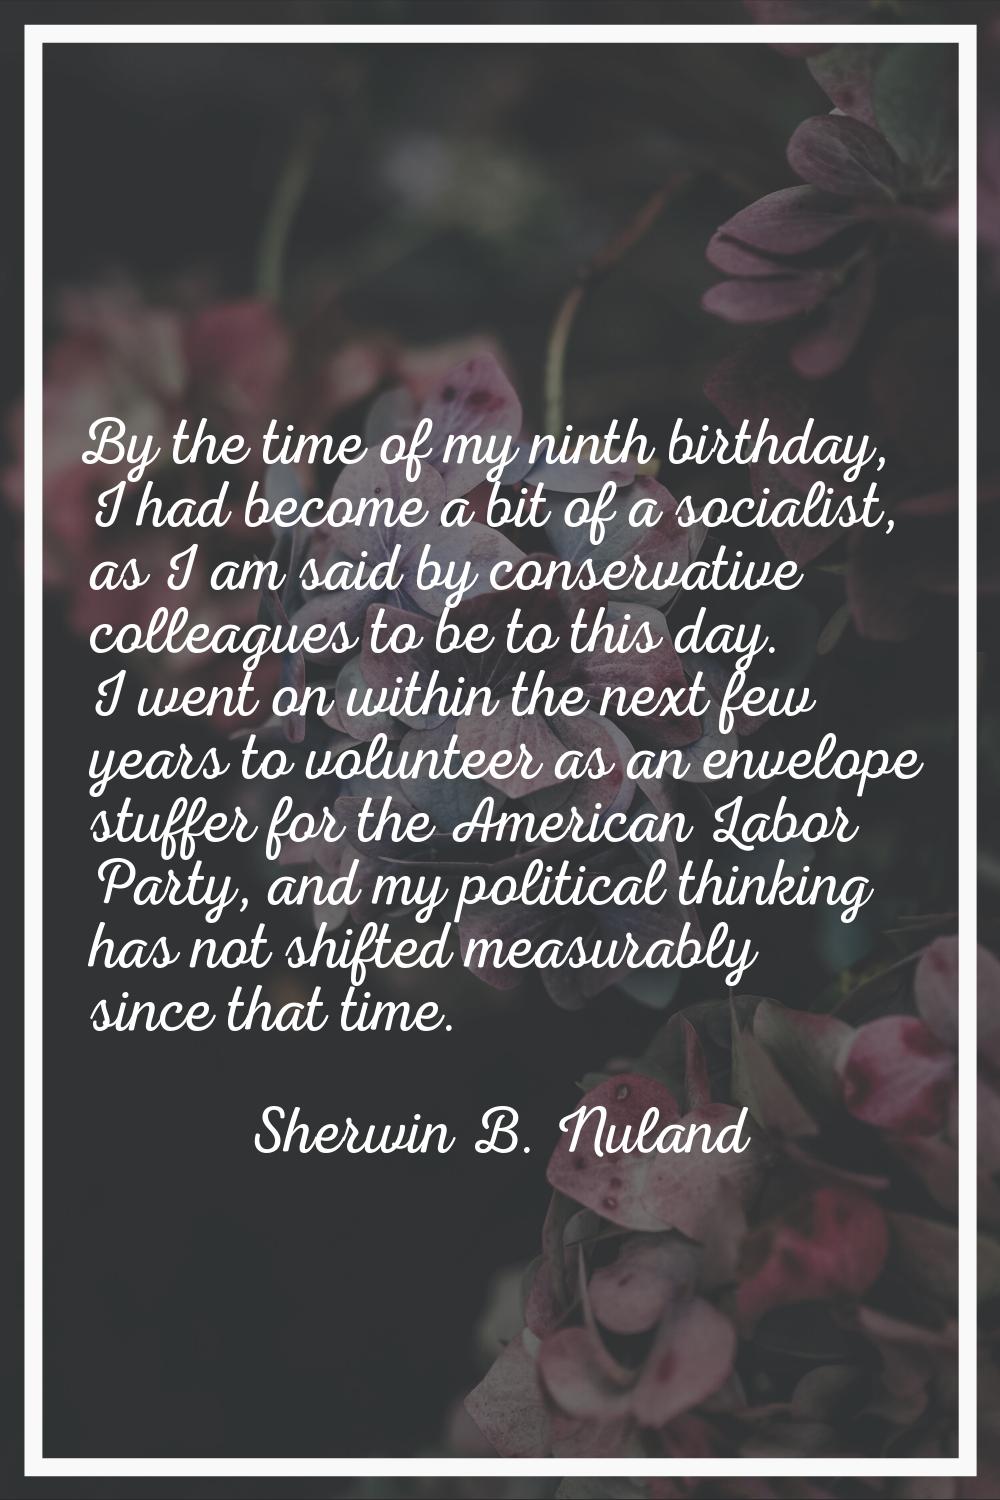 By the time of my ninth birthday, I had become a bit of a socialist, as I am said by conservative c